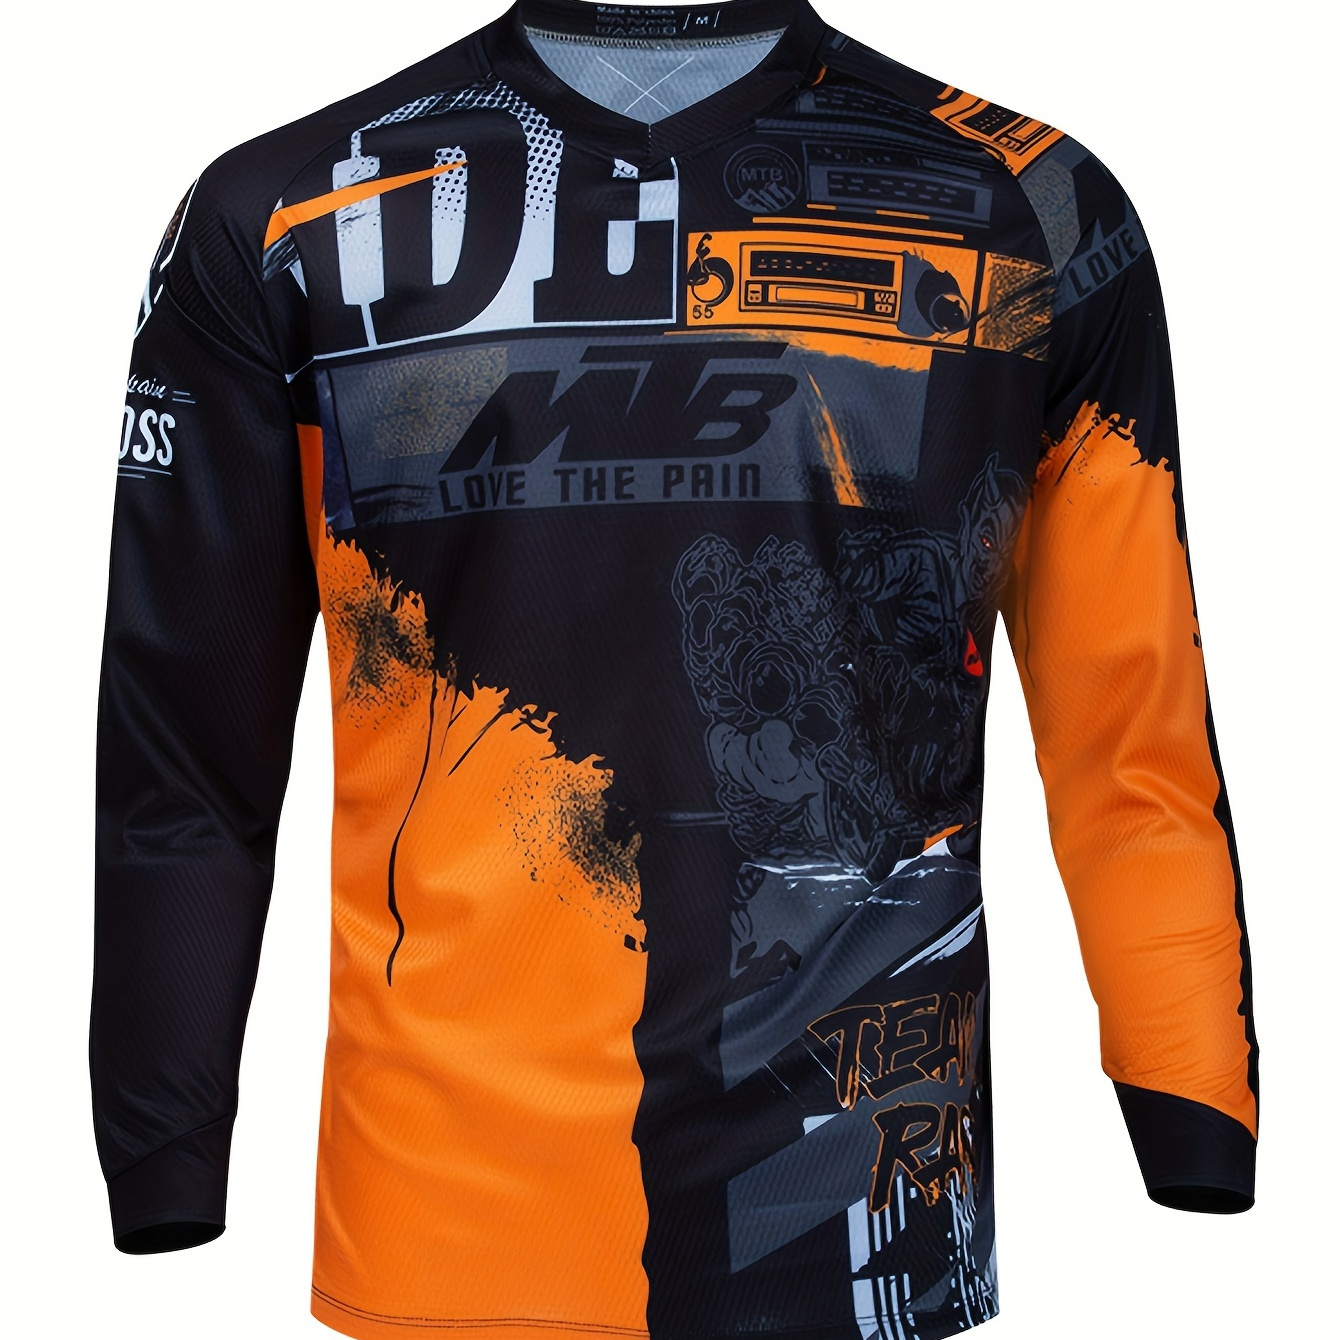 

Men's Cycling Jersey, Gradient Graphic, Quick Dry, Moisture Wicking, Breathable Long Sleeves Mtb Mountain Bike Shirt For Biking & Riding Sports